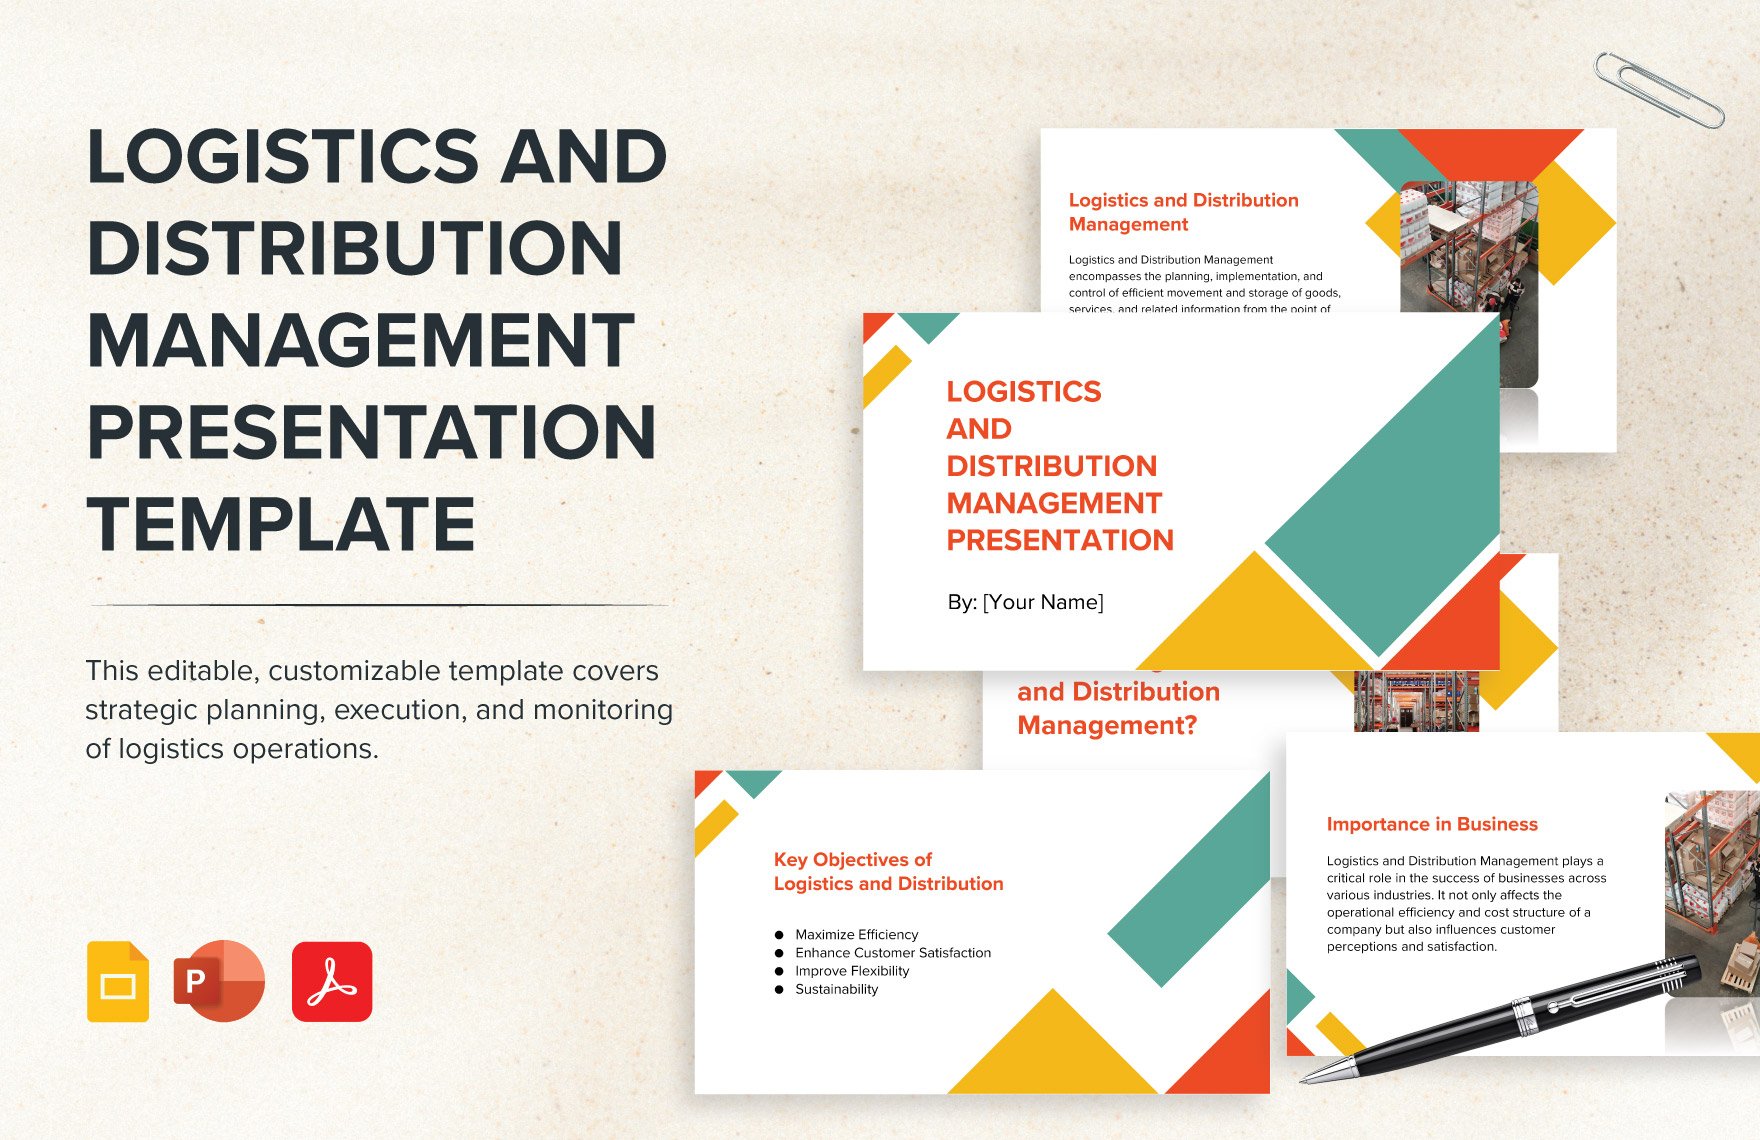 Free Logistics and Distribution Management Presentation Template in PDF, PowerPoint, Google Slides